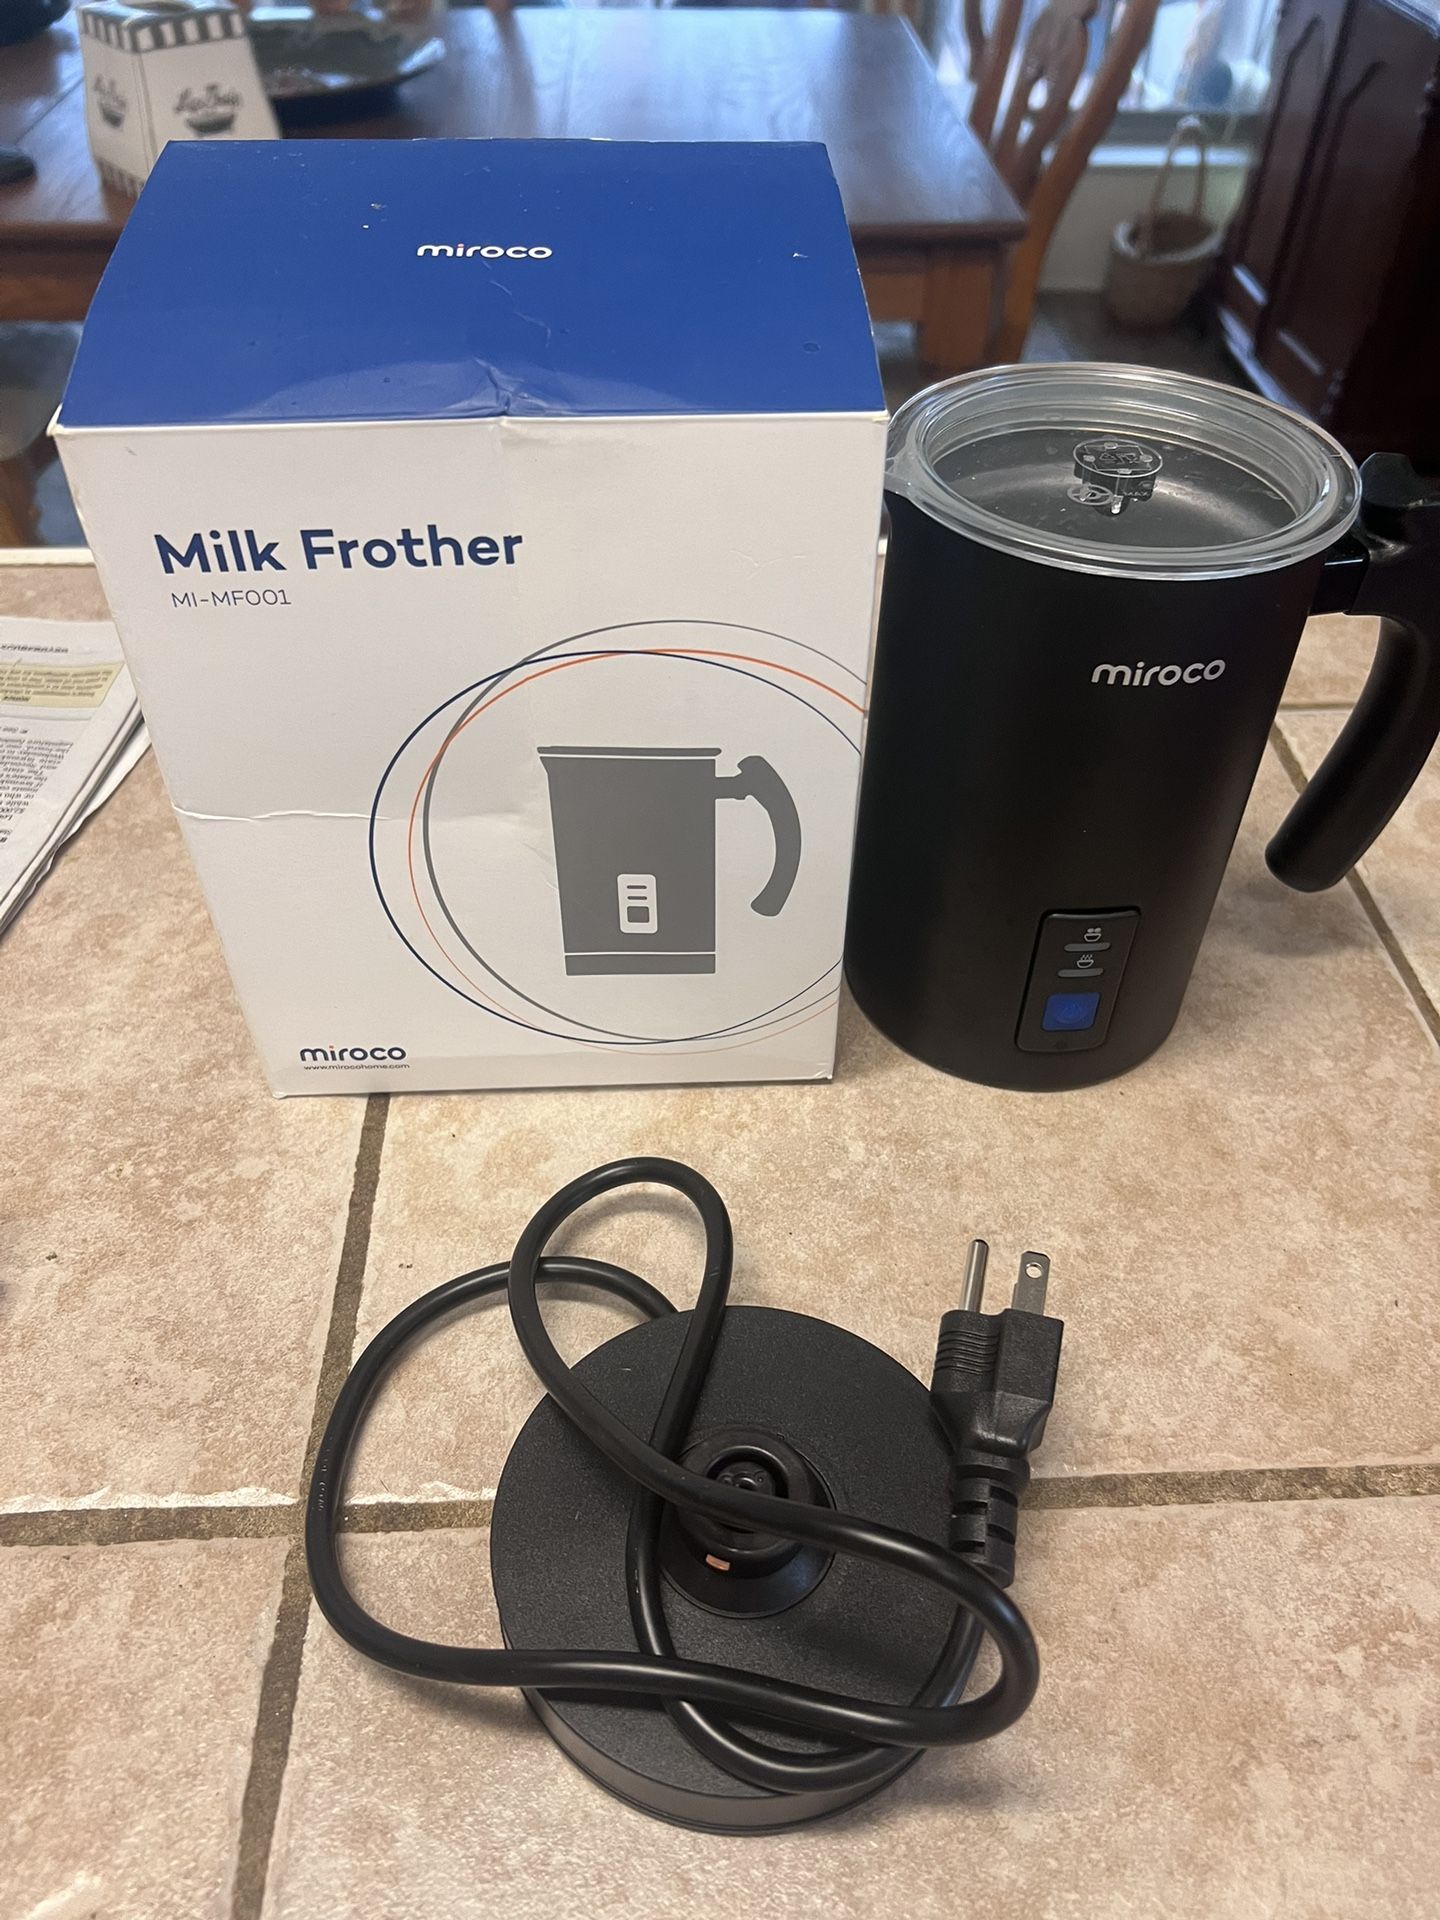 Milk Frother. Miroco